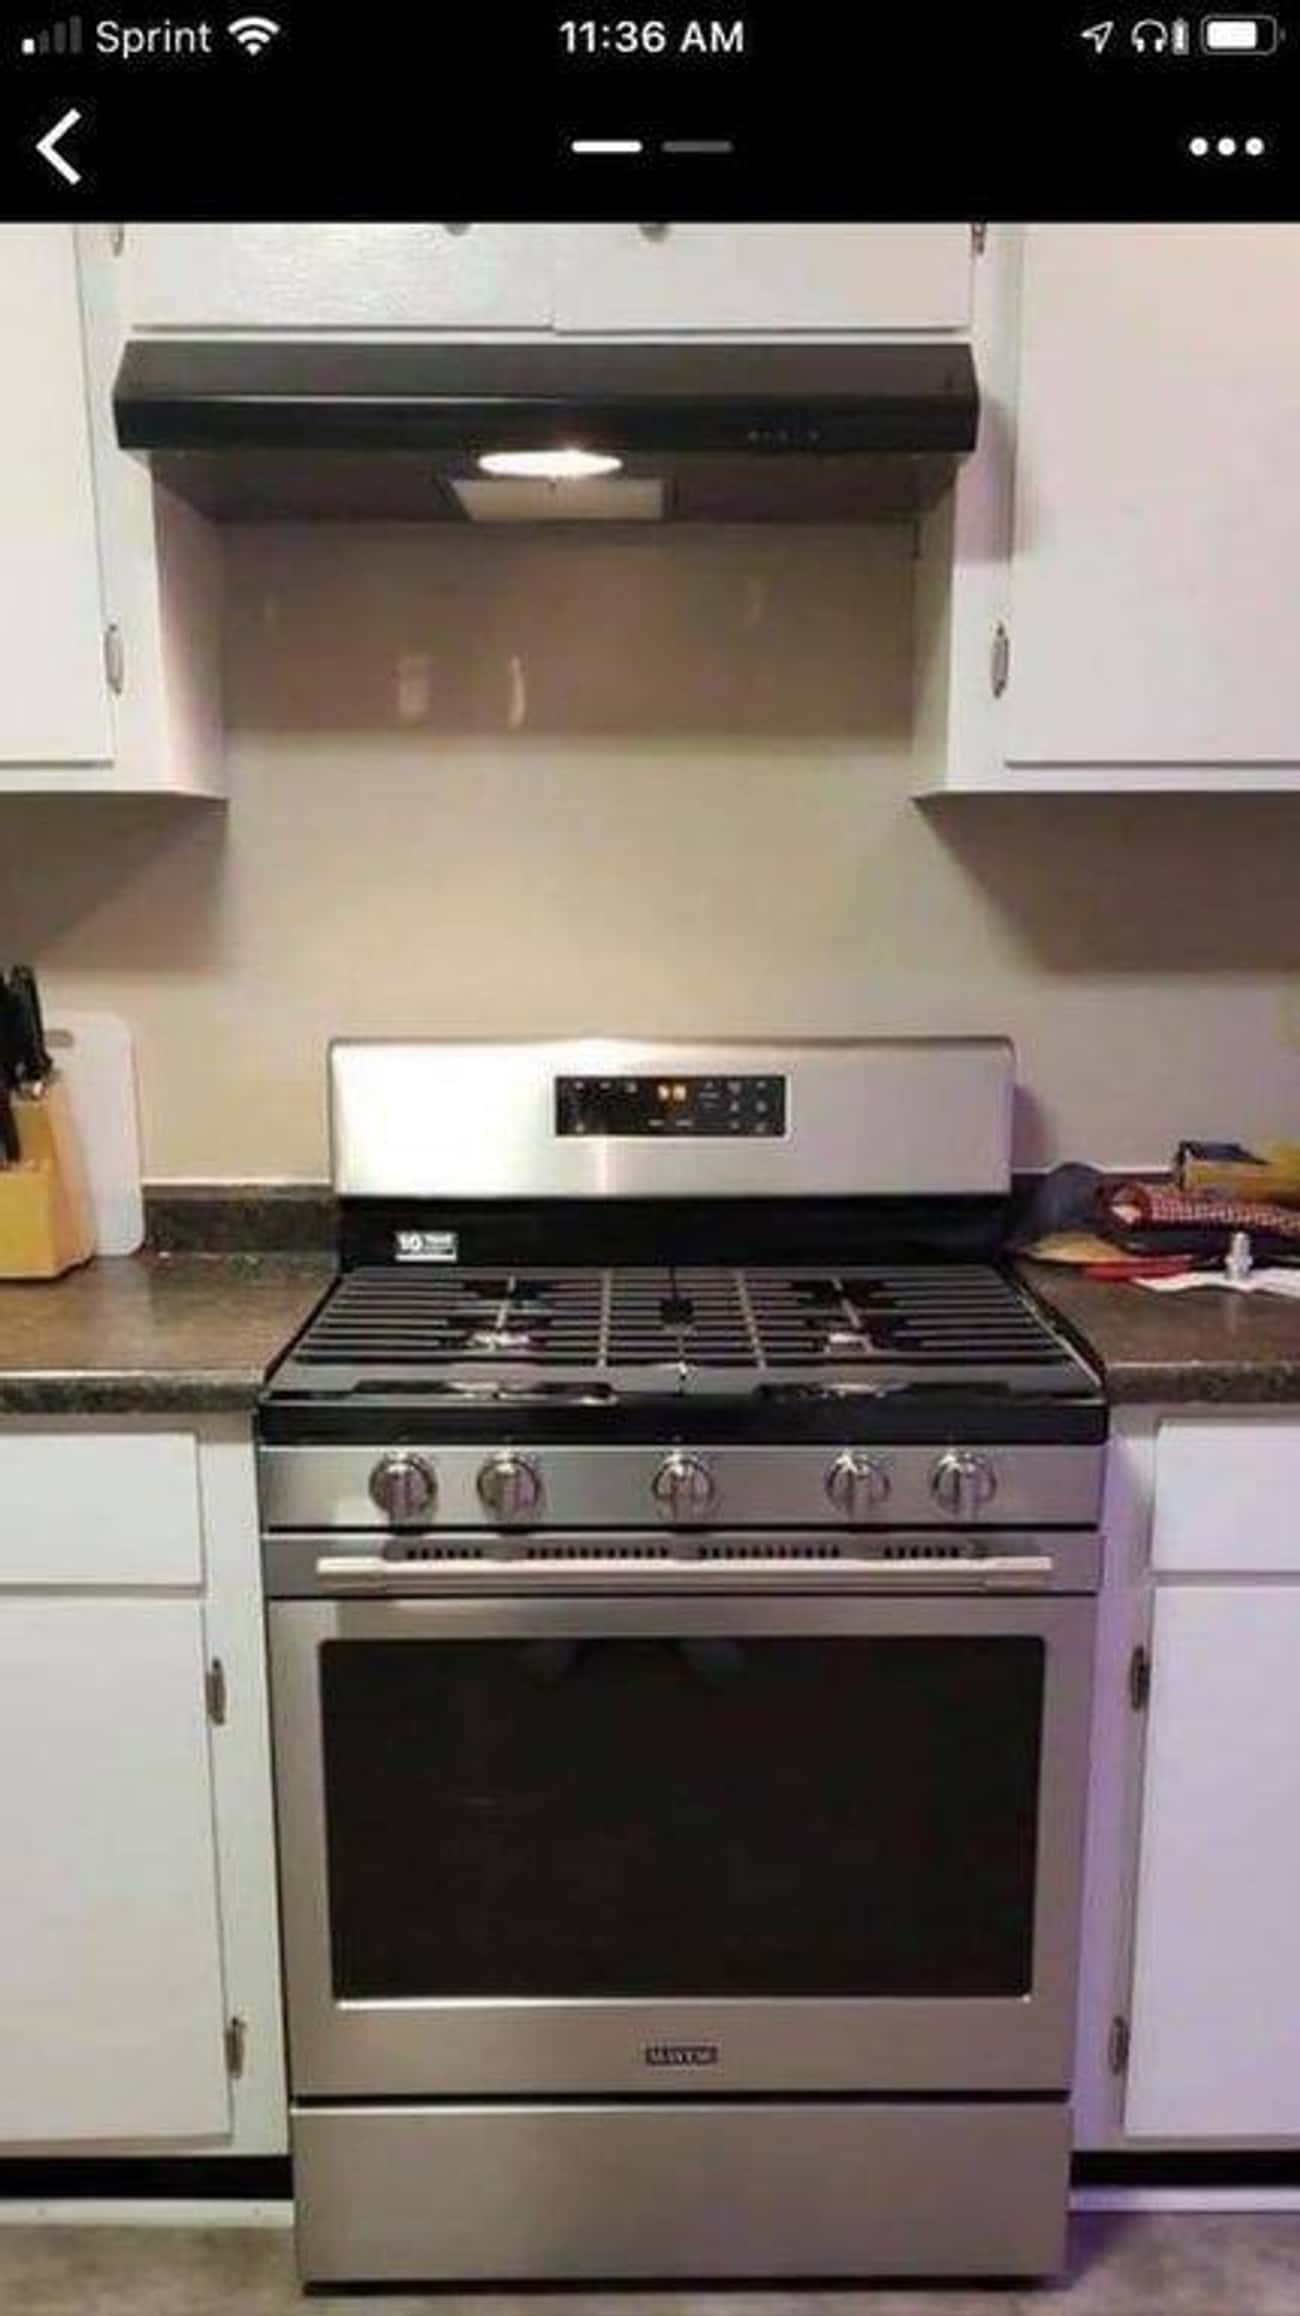 A Brand New Oven... With The Vent Misplaced